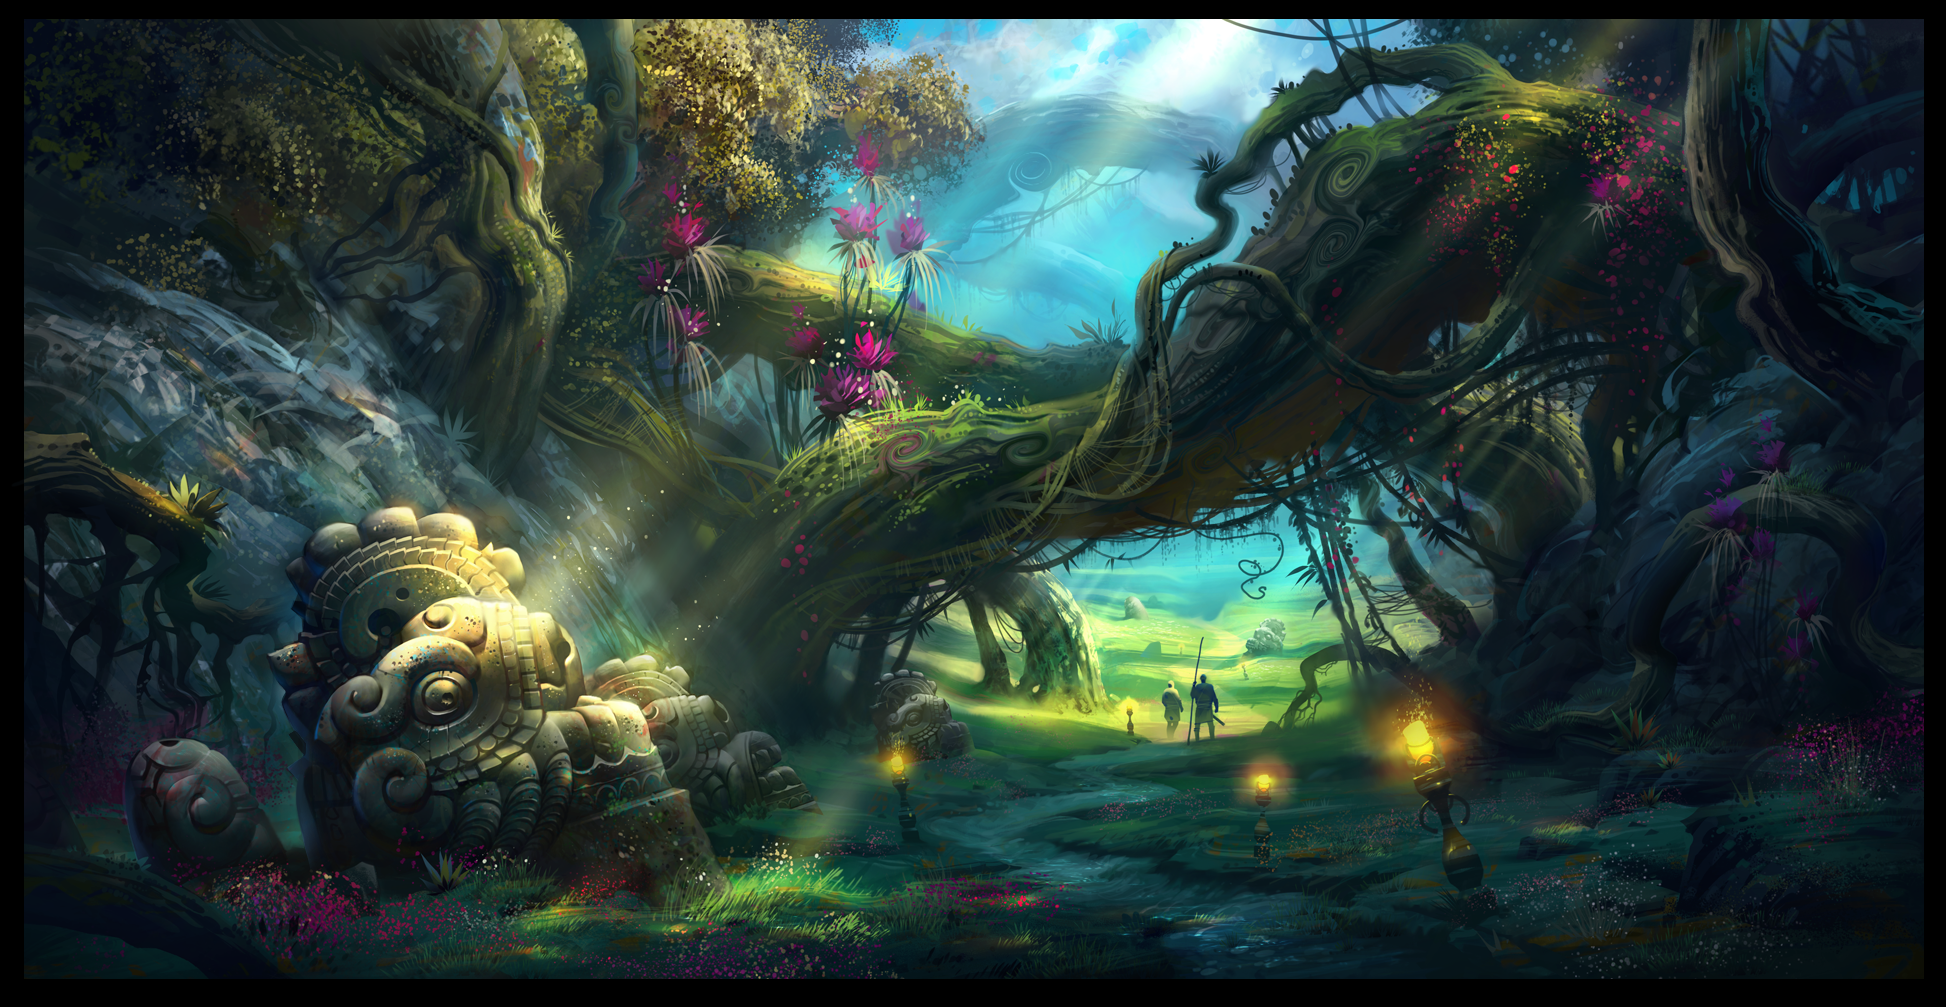 magic_forest_2_by_ivany86-d5cl0xq.png